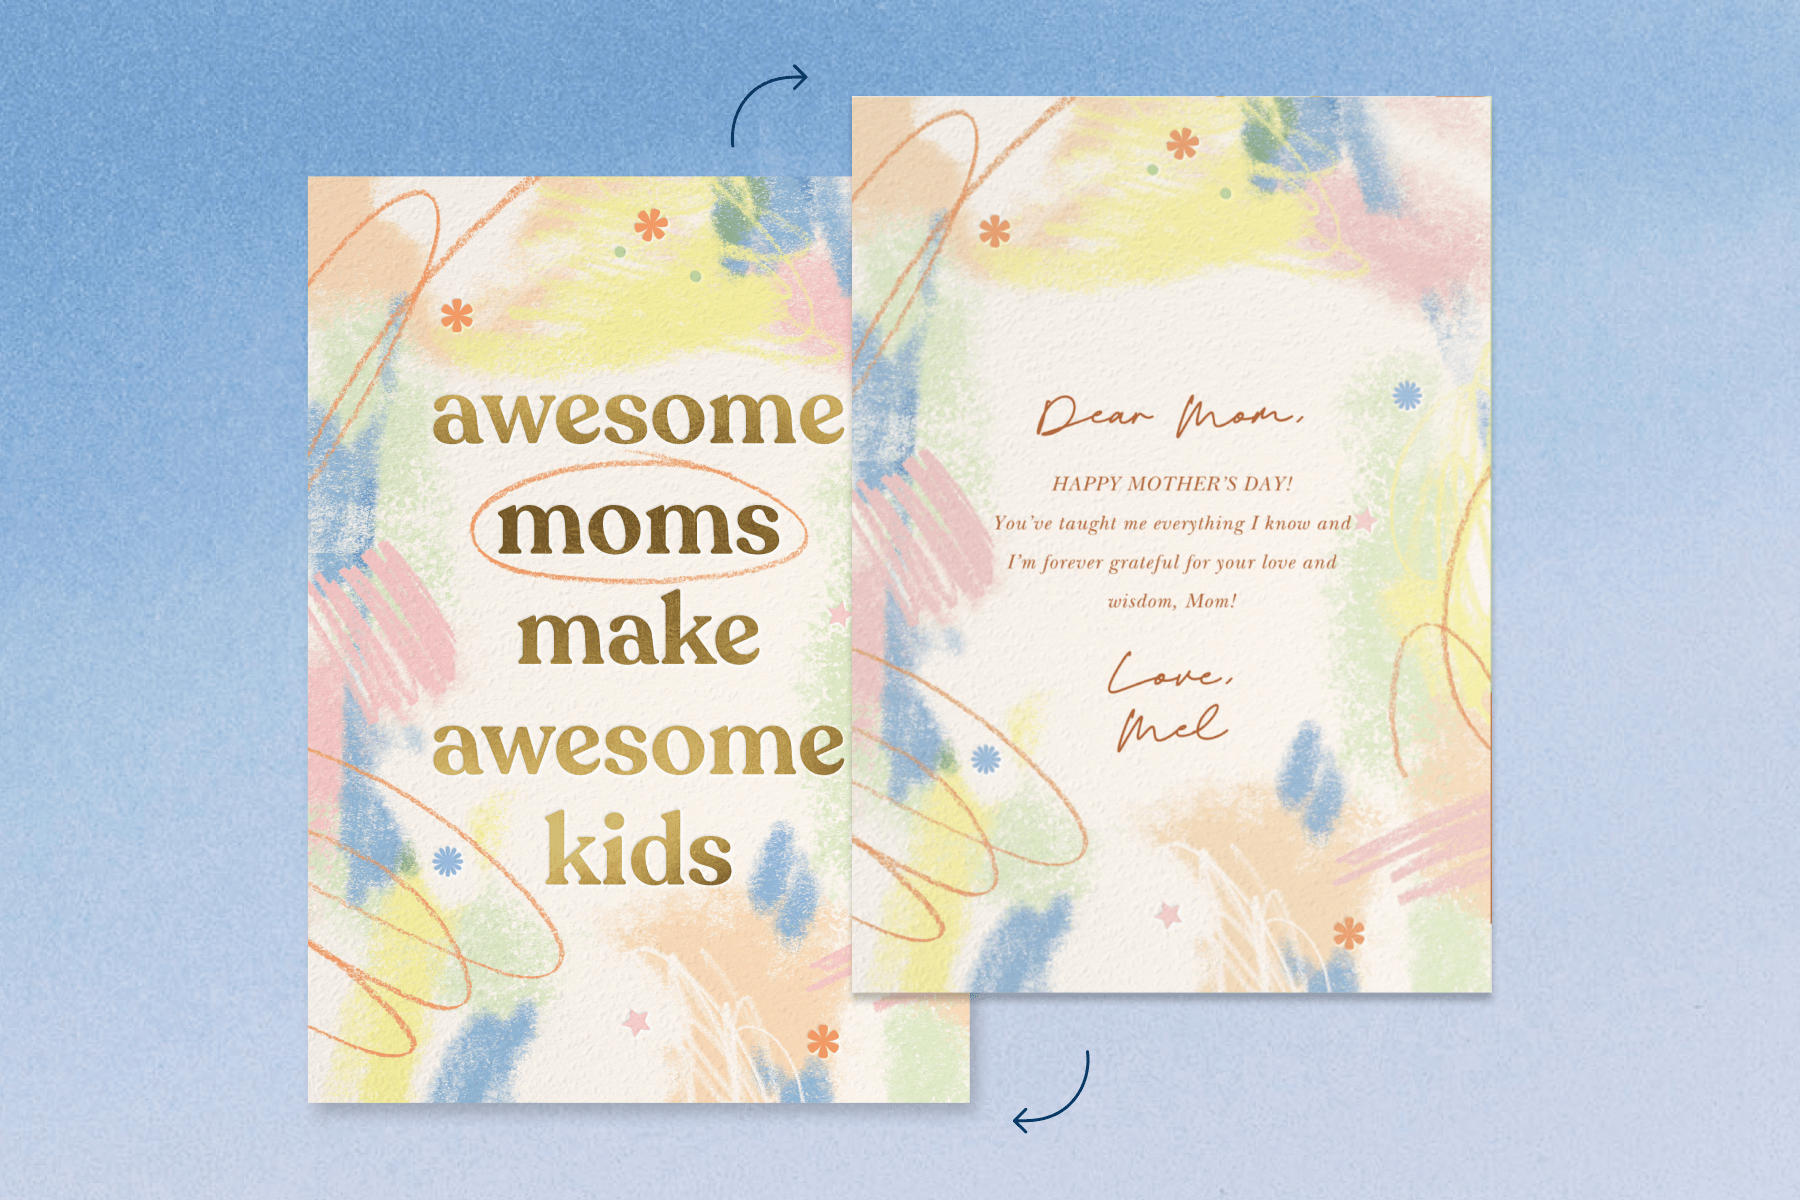 A doodle-filled Mother’s Day card showing one of the messages suggested below. The card reads “Awesome moms make awesome kids.”